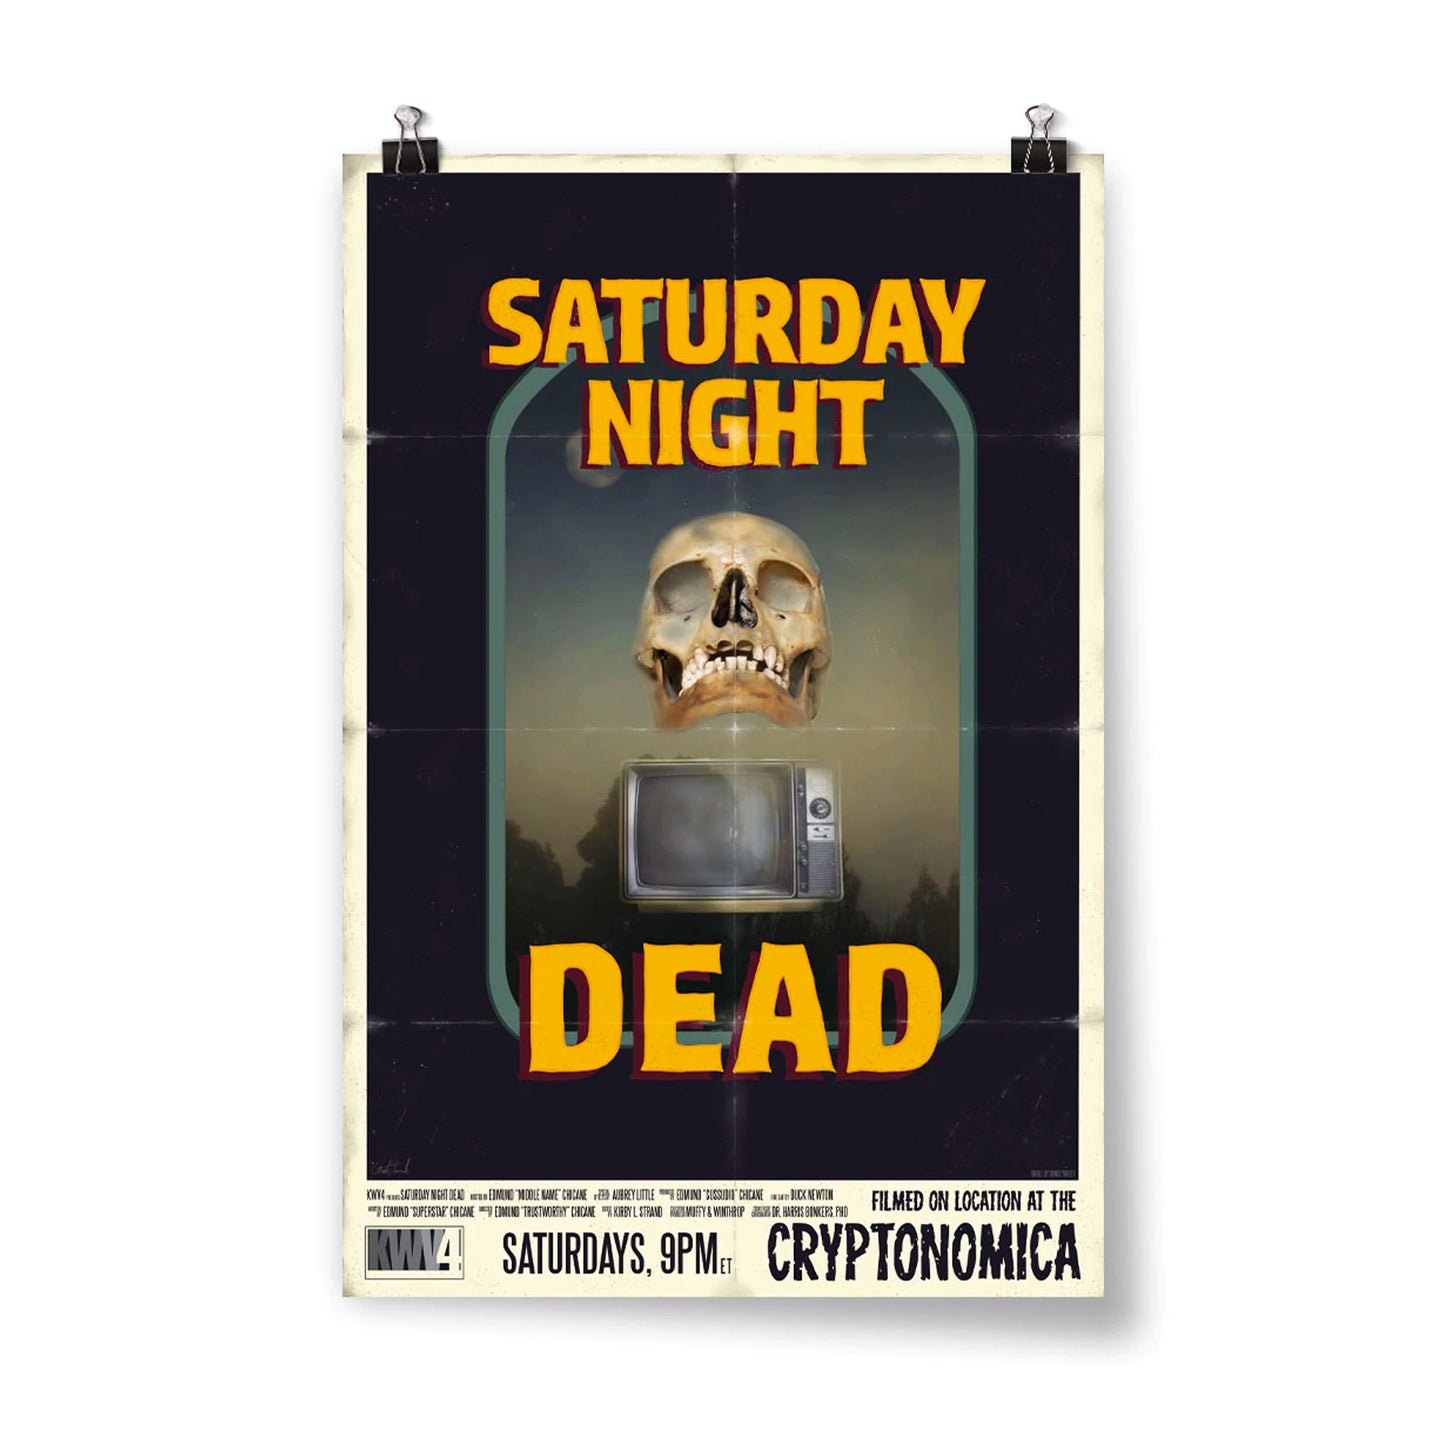 Image of a retro poster. In the center is a skull hovering over an old-fashioned TV. The backgound is a hazy forest scene. It's surrounded by a thin light blue border with a thick black border around that. Above it are the words "Saturday night" and below is the word "dead" in yellow with a maroon drop shadow. At the bottom of the poster it says "Saturdays, 9PM ET" and "Filmed on location at the Cryptonomica".